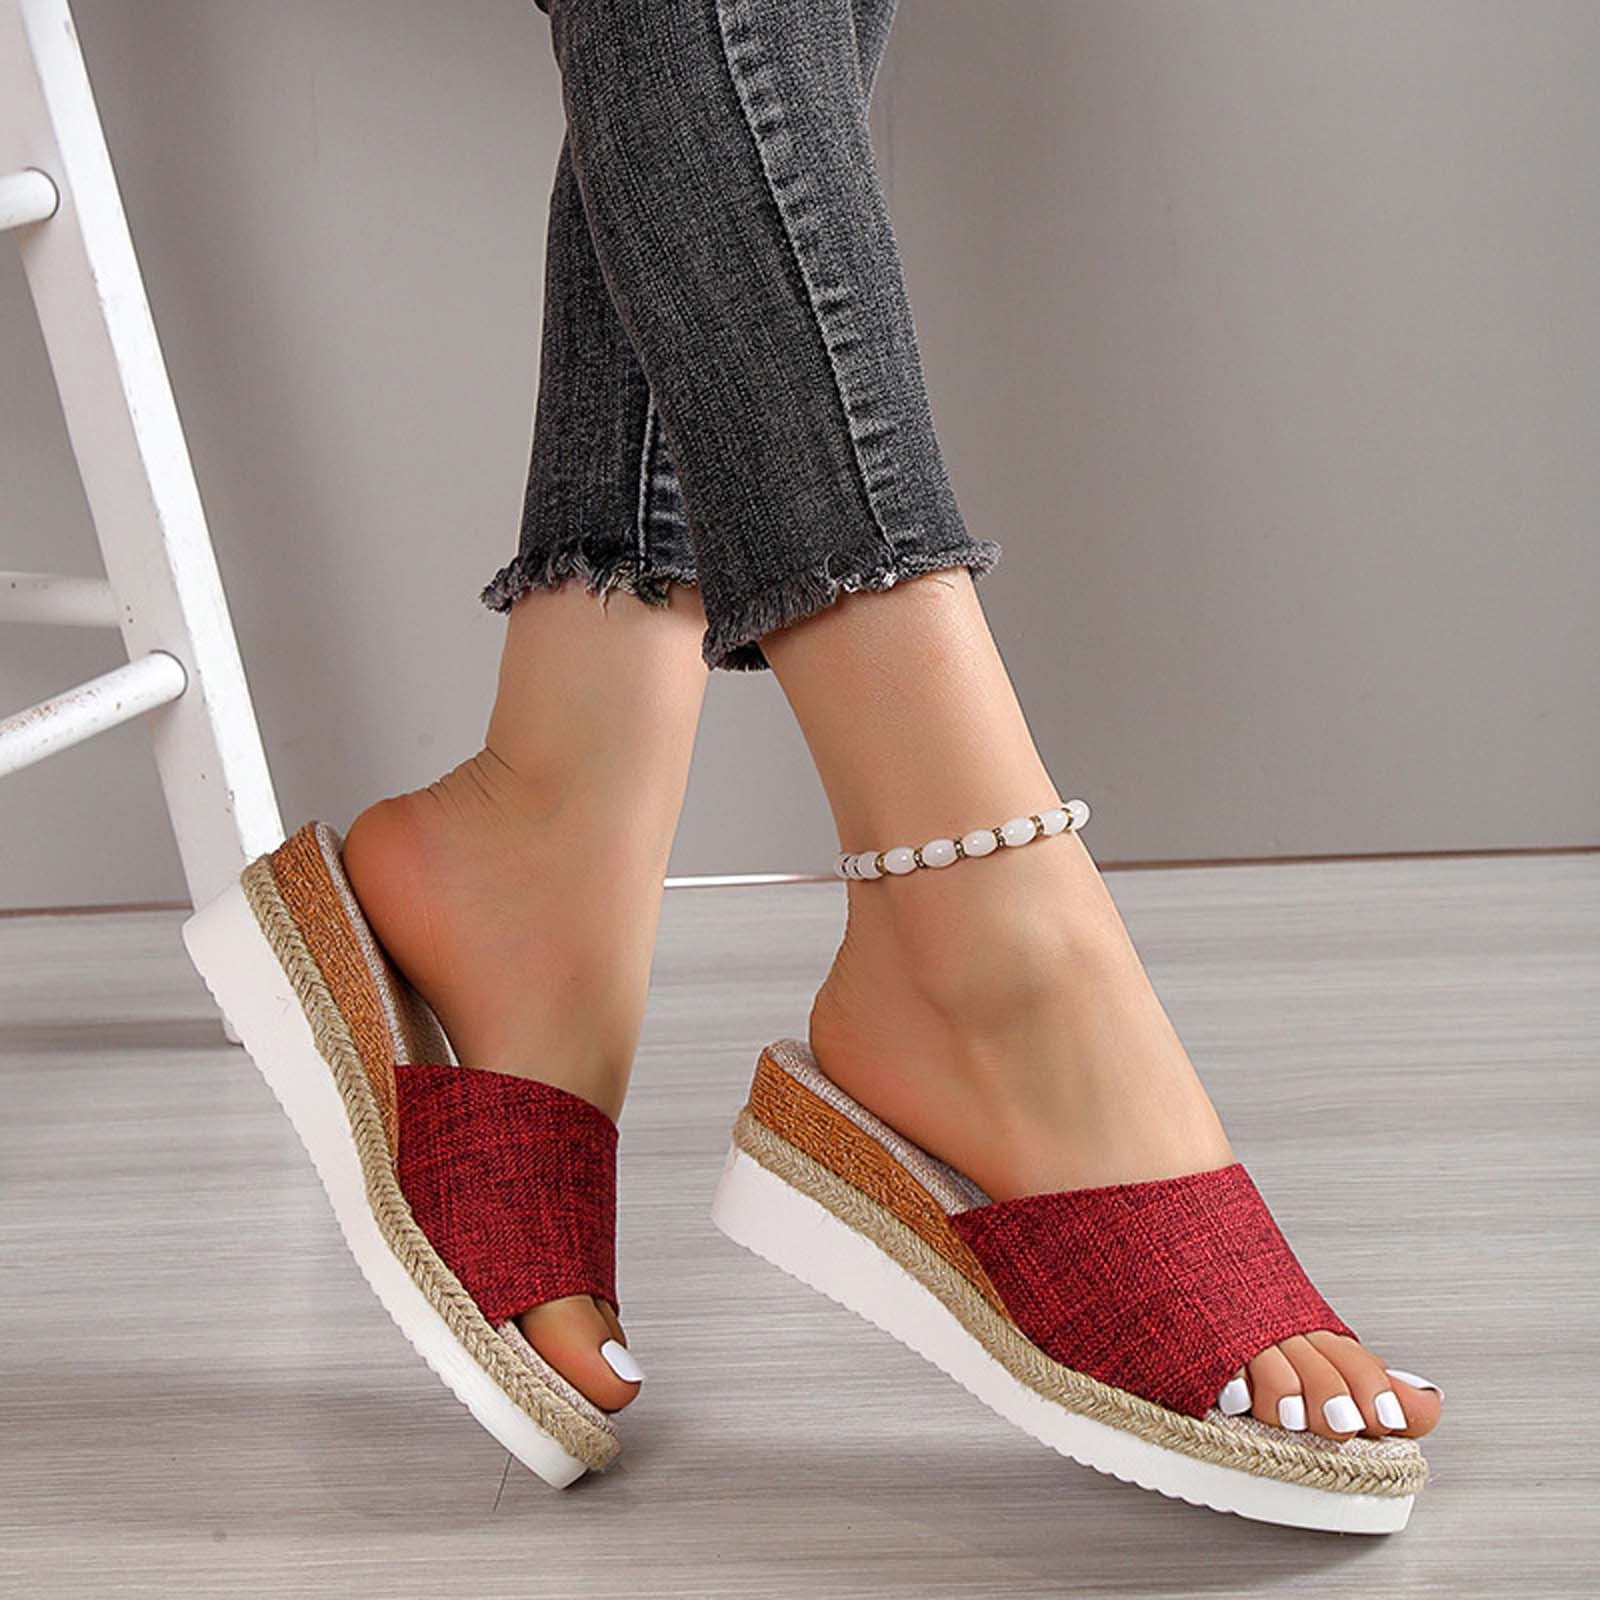 Women's Comfortable Sandals with Arch Support | Vionic Shoes-gemektower.com.vn